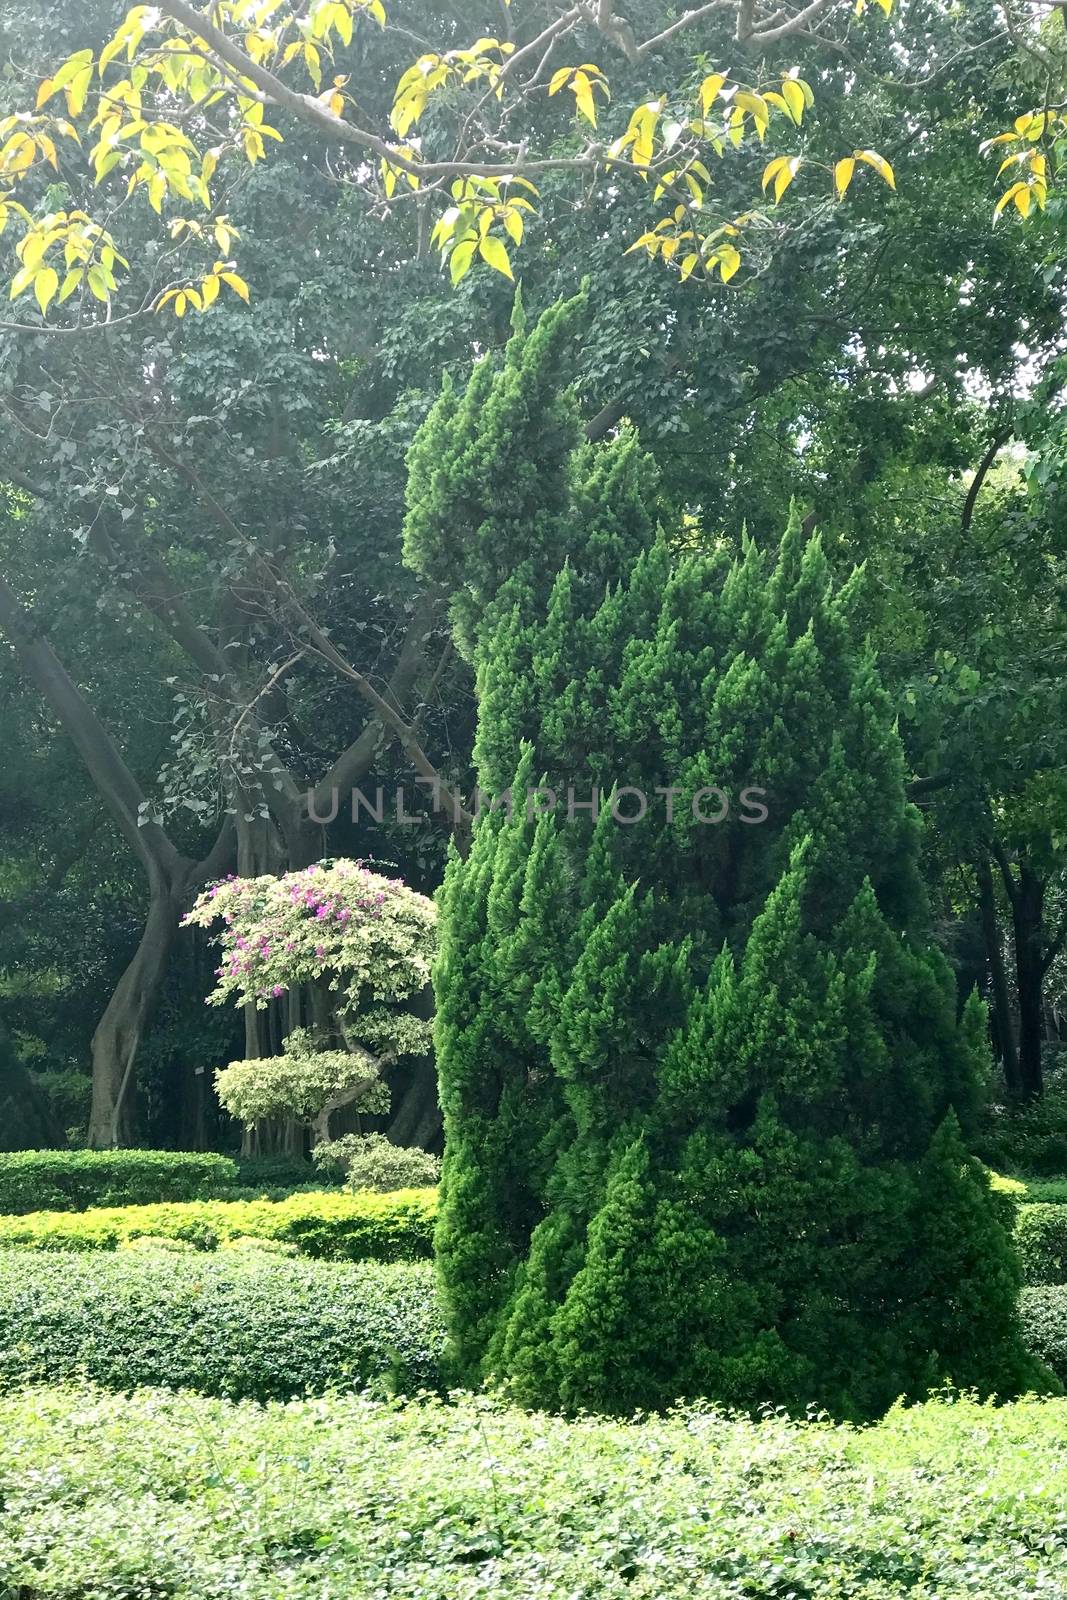 Vertical green plant and tree in public park by cougarsan